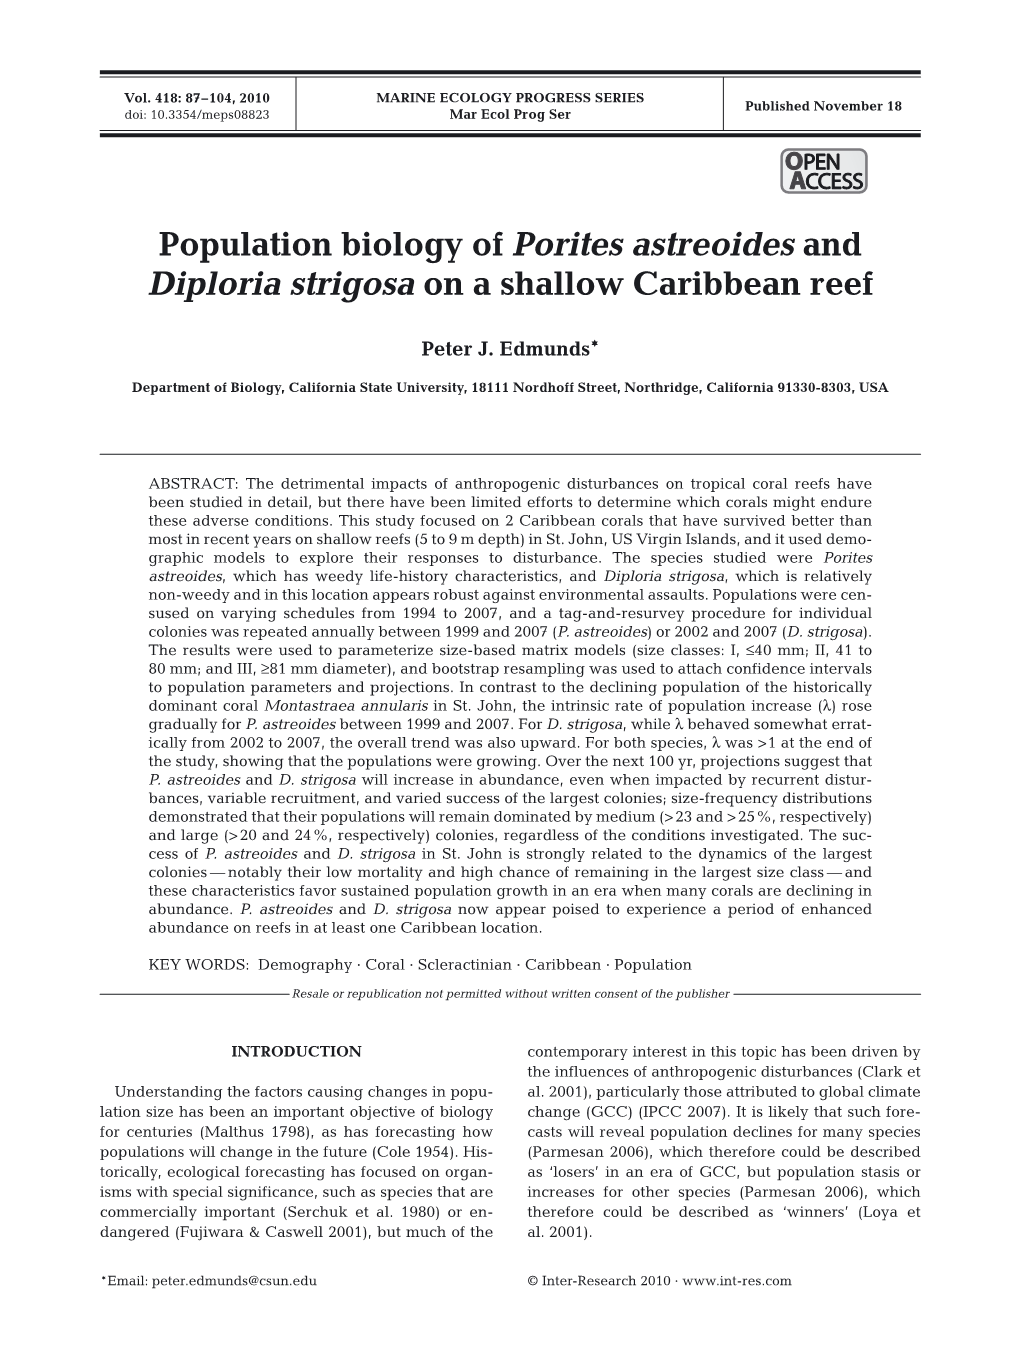 Population Biology of Porites Astreoides and Diploria Strigosa on a Shallow Caribbean Reef